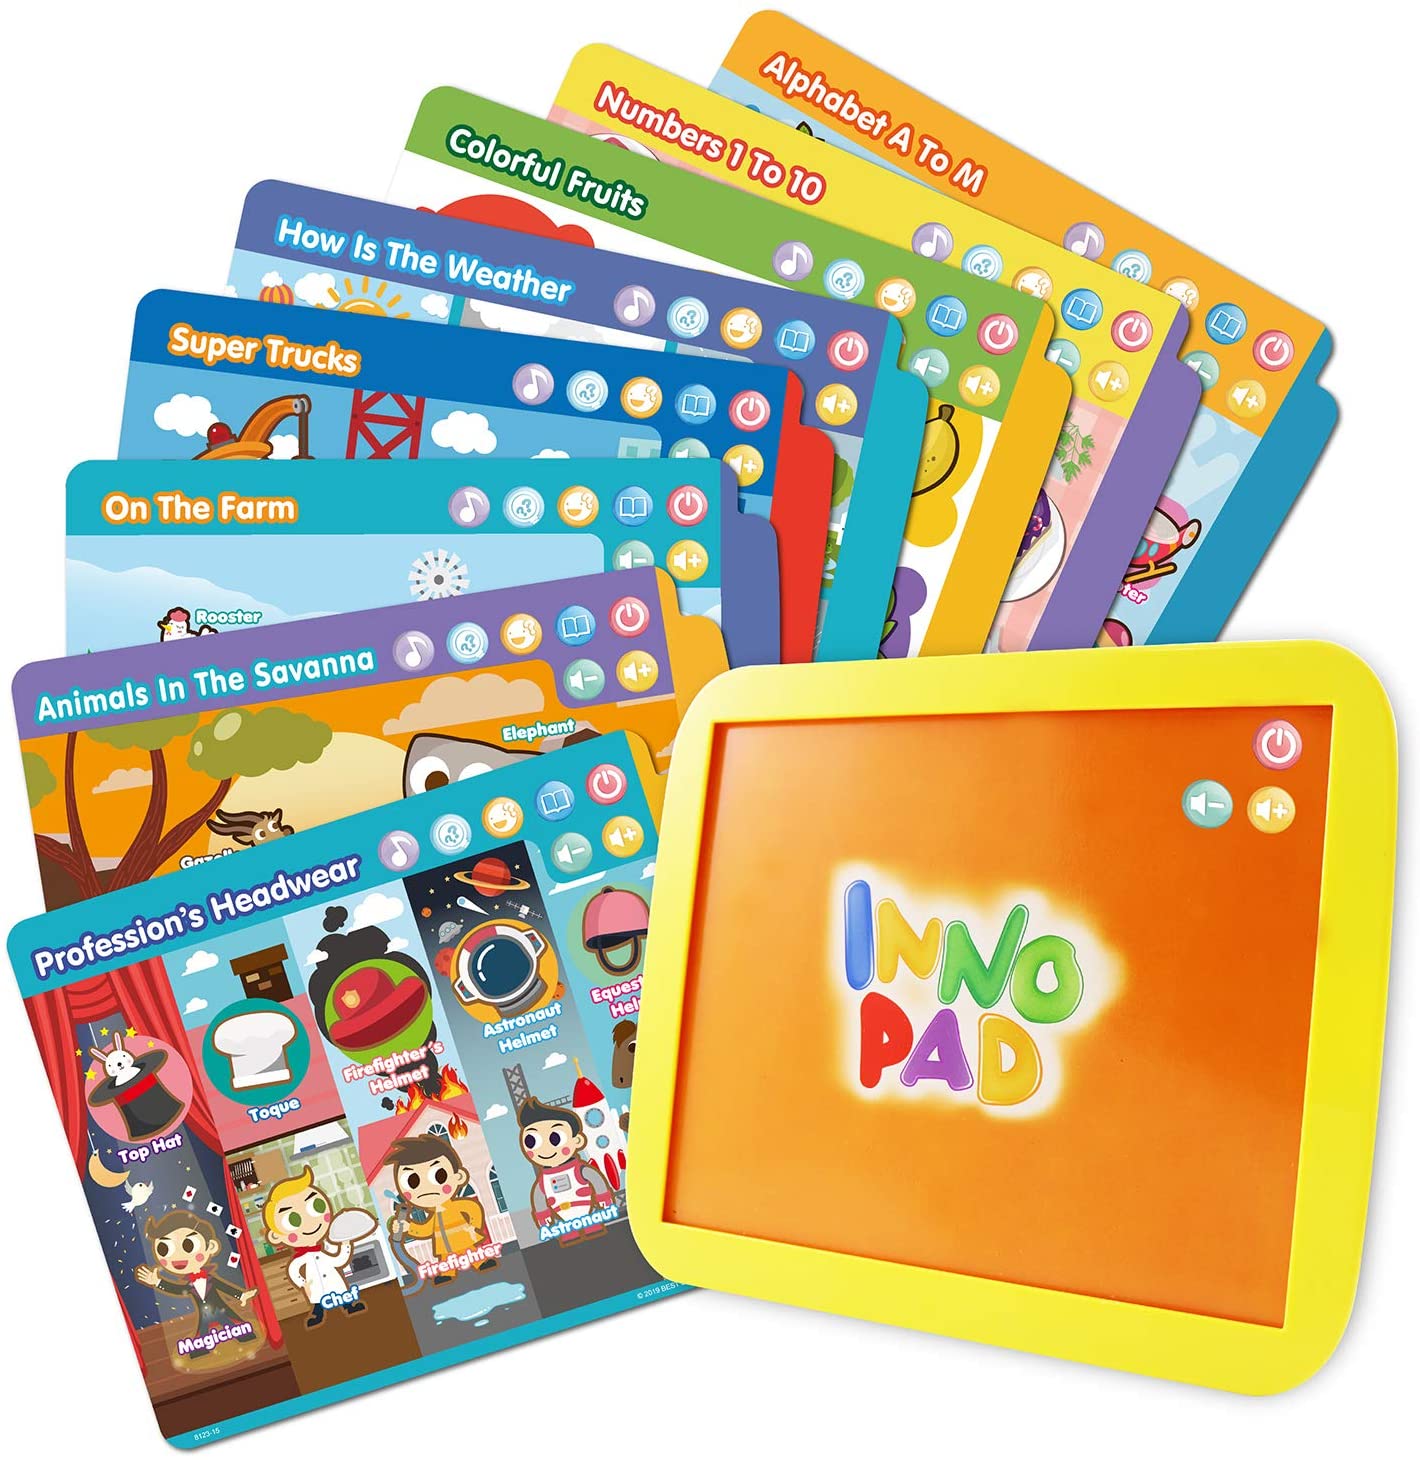 BEST LEARNING INNO PAD Smart Fun Lessons - for Toddlers Ages 2 to 5 Years Old - e4cents